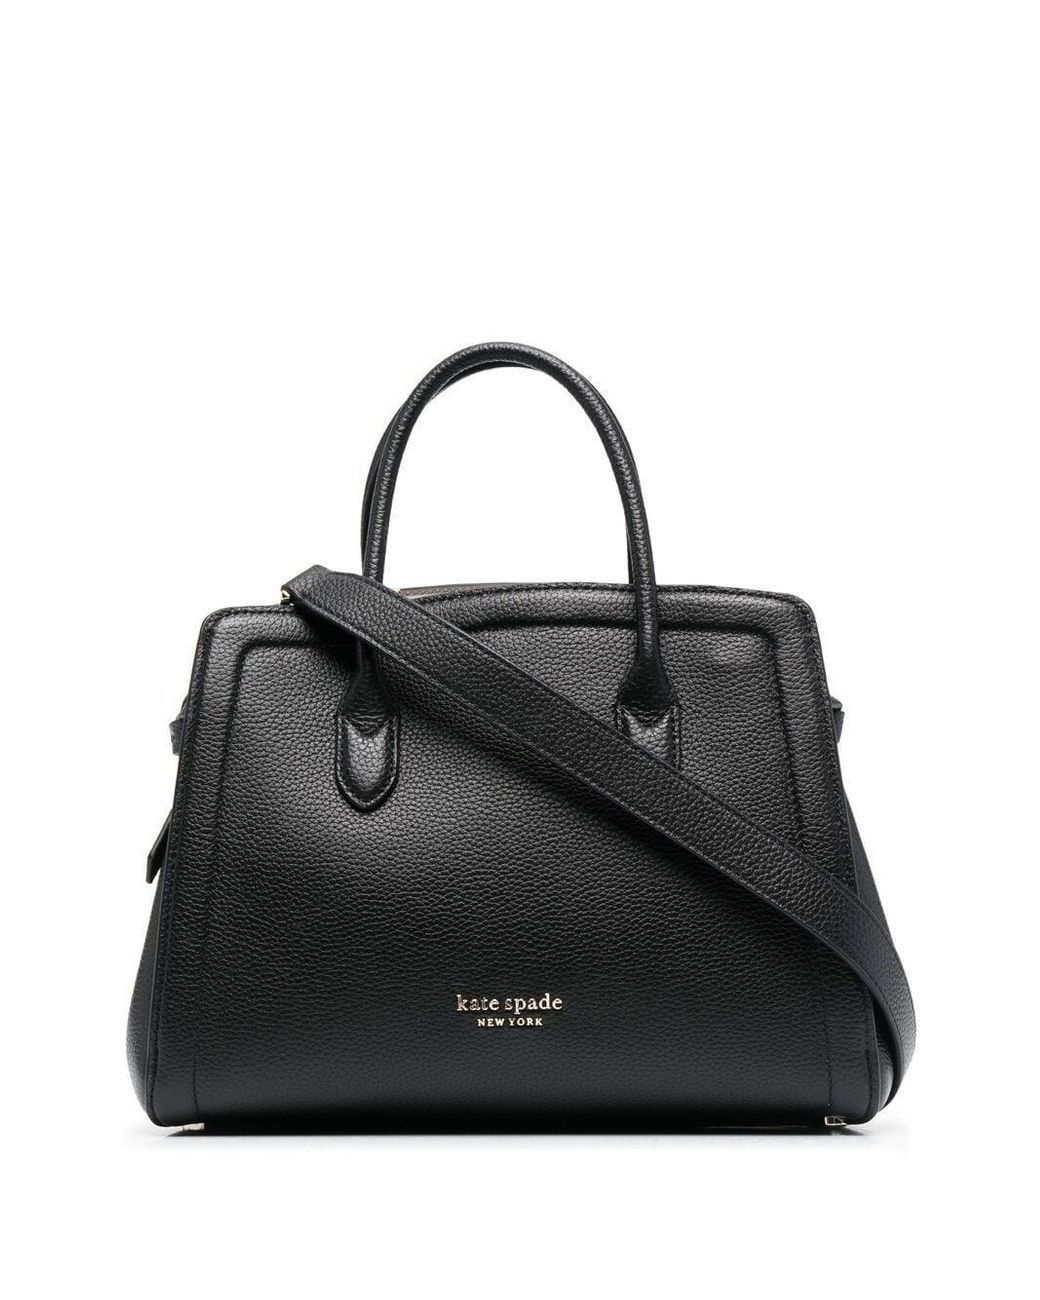 Kate Spade Knott Leather Tote Bag in Black - Lyst